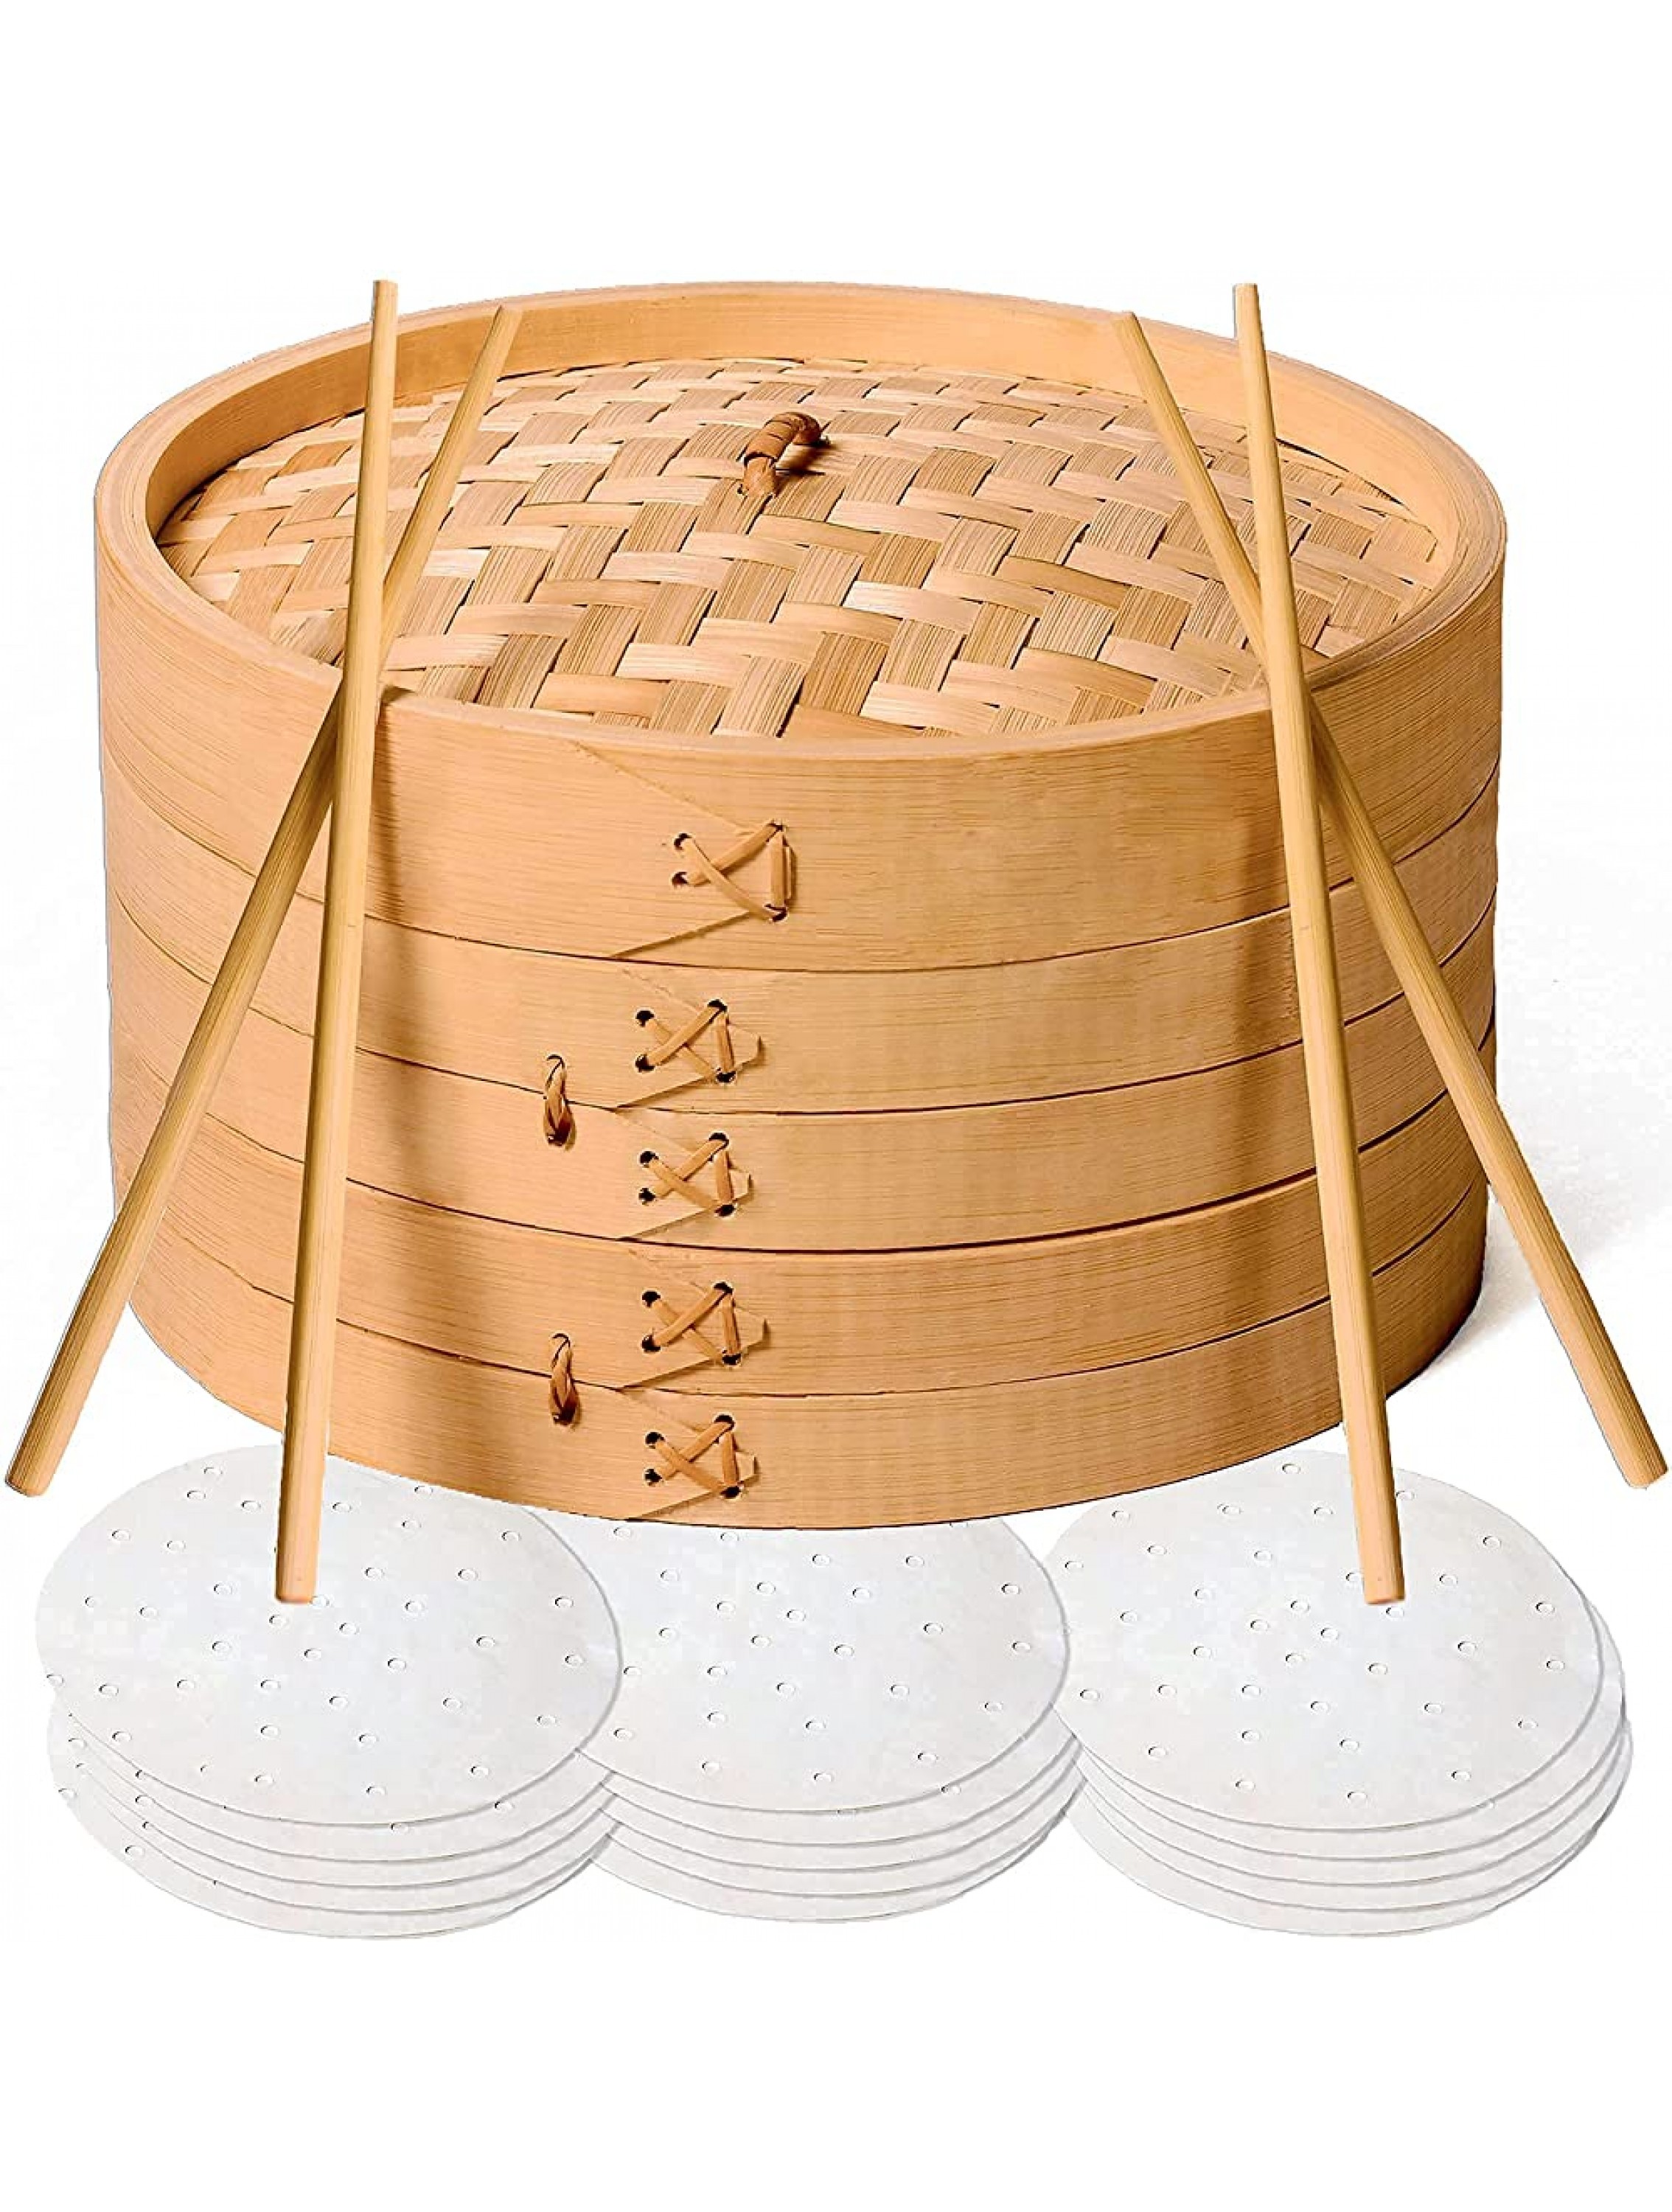 Bamboo Steamer Basket 10 Inch Handmade 2 Tier Dumpling Steamer with Lid for Asian Cooking Dim Sum Vegetables Rice Fish 50 Bamboo Steamer Liners with 2-Pairs of Chopsticks - BPC94KCZL